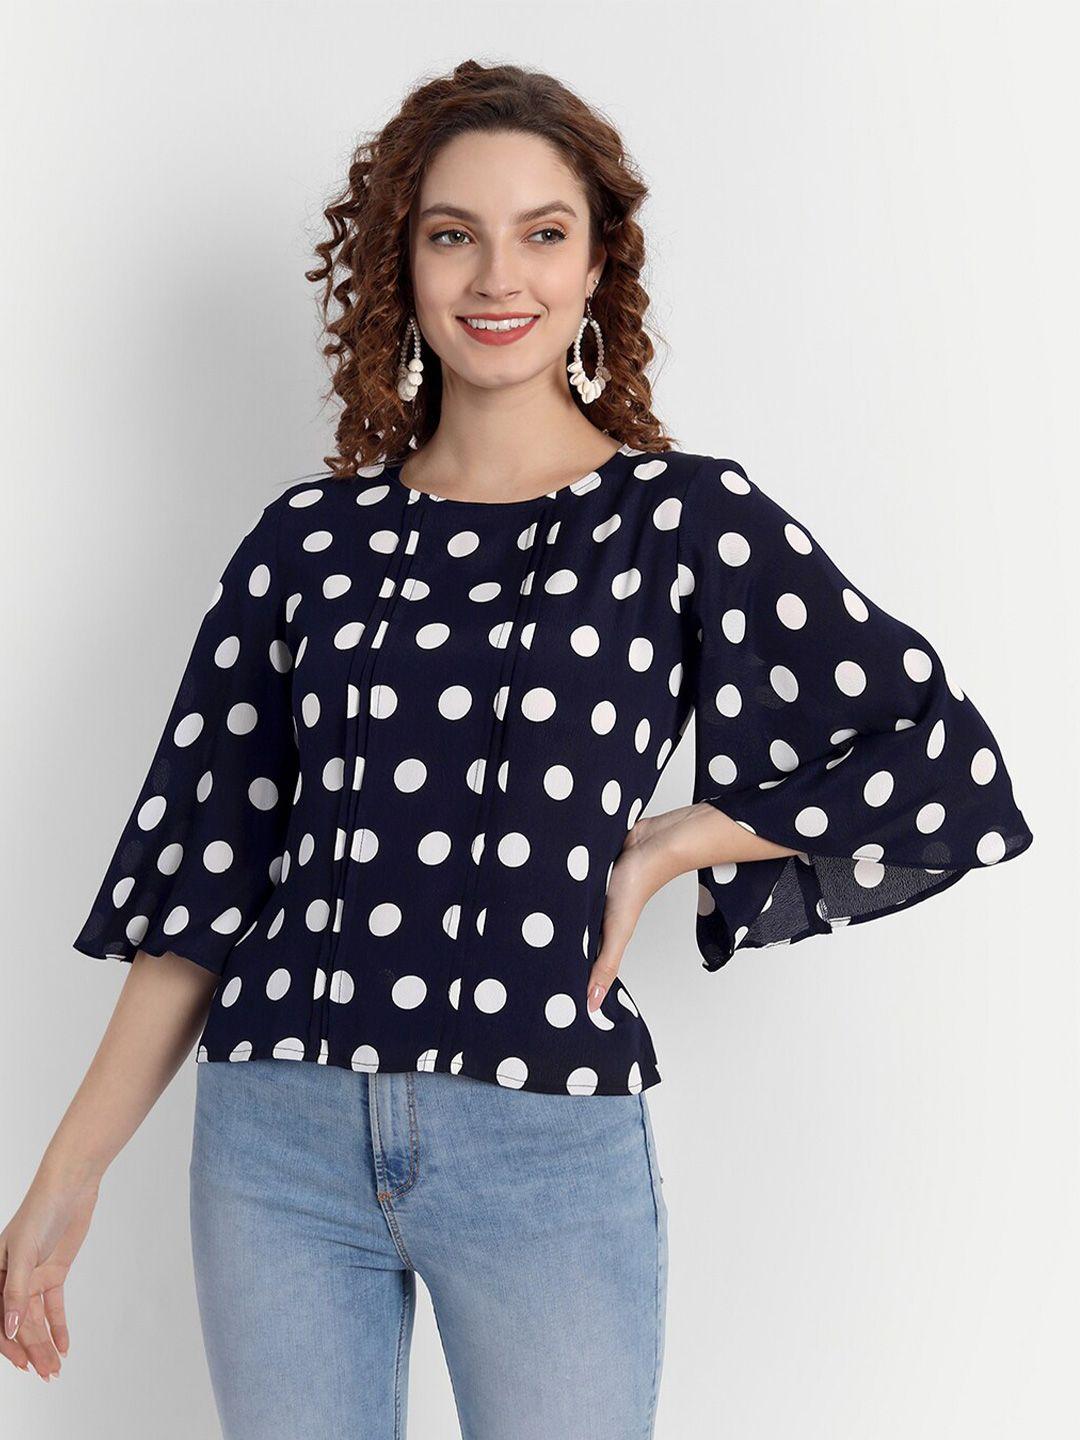 parassio clothings women navy blue print georgette top